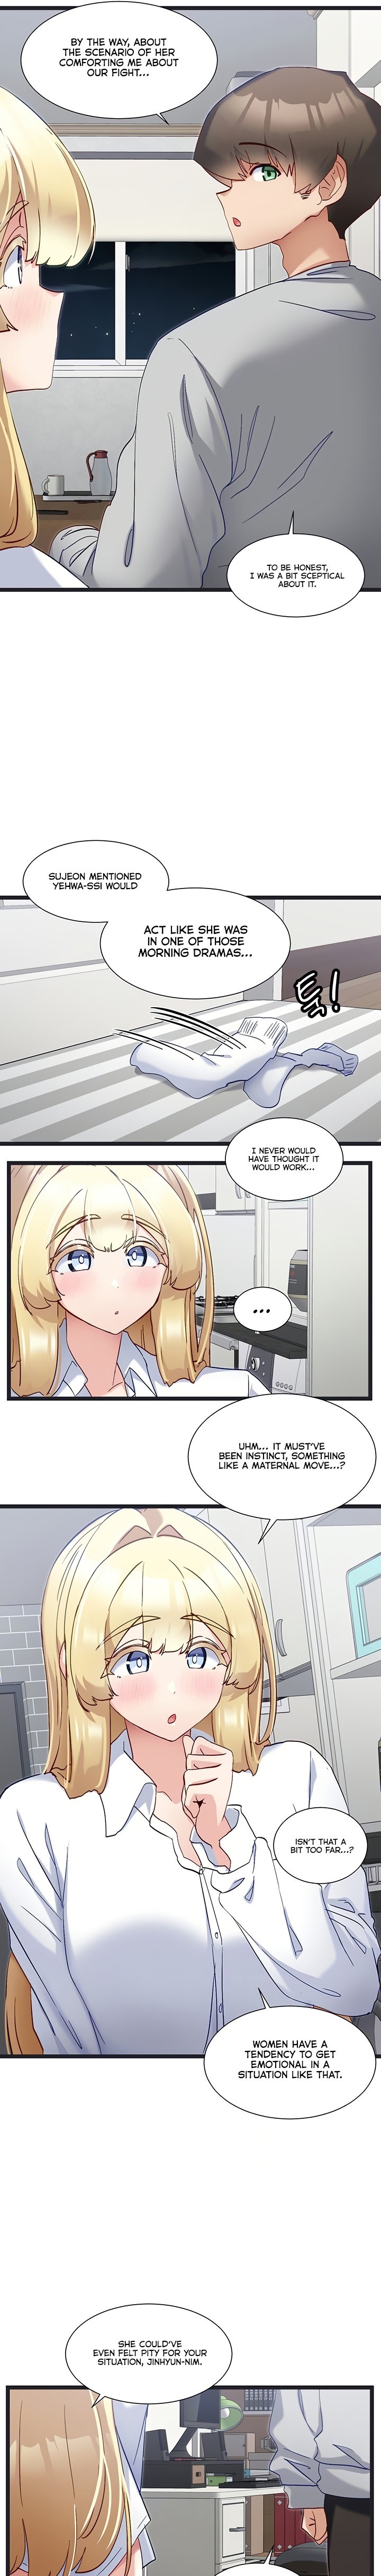 Heroine App - Chapter 47 Page 4